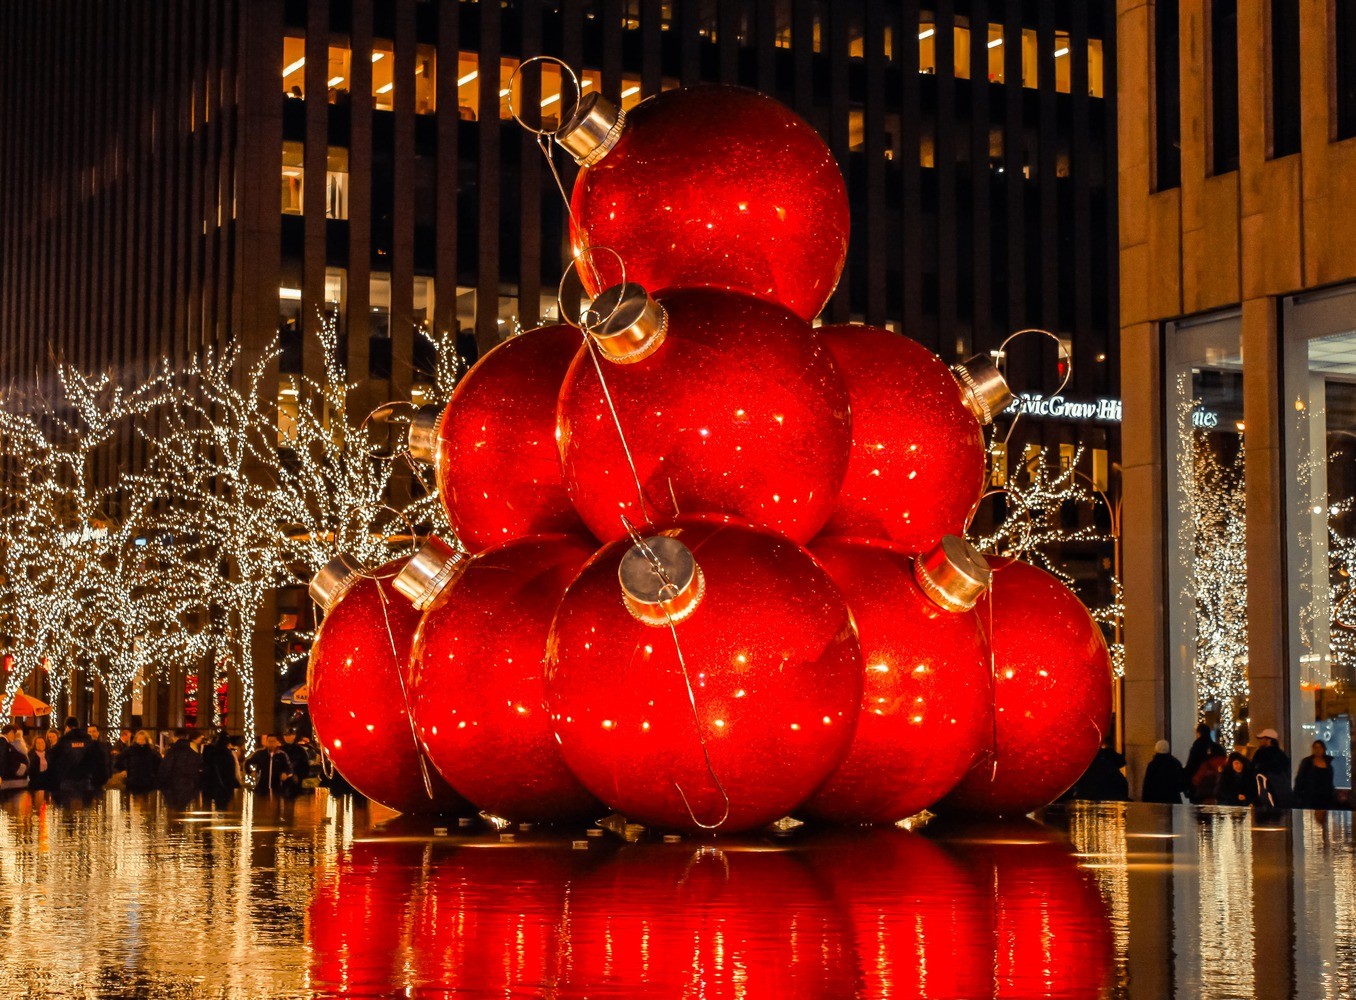 A Local's Guide to Celebrating the Holidays in NYC